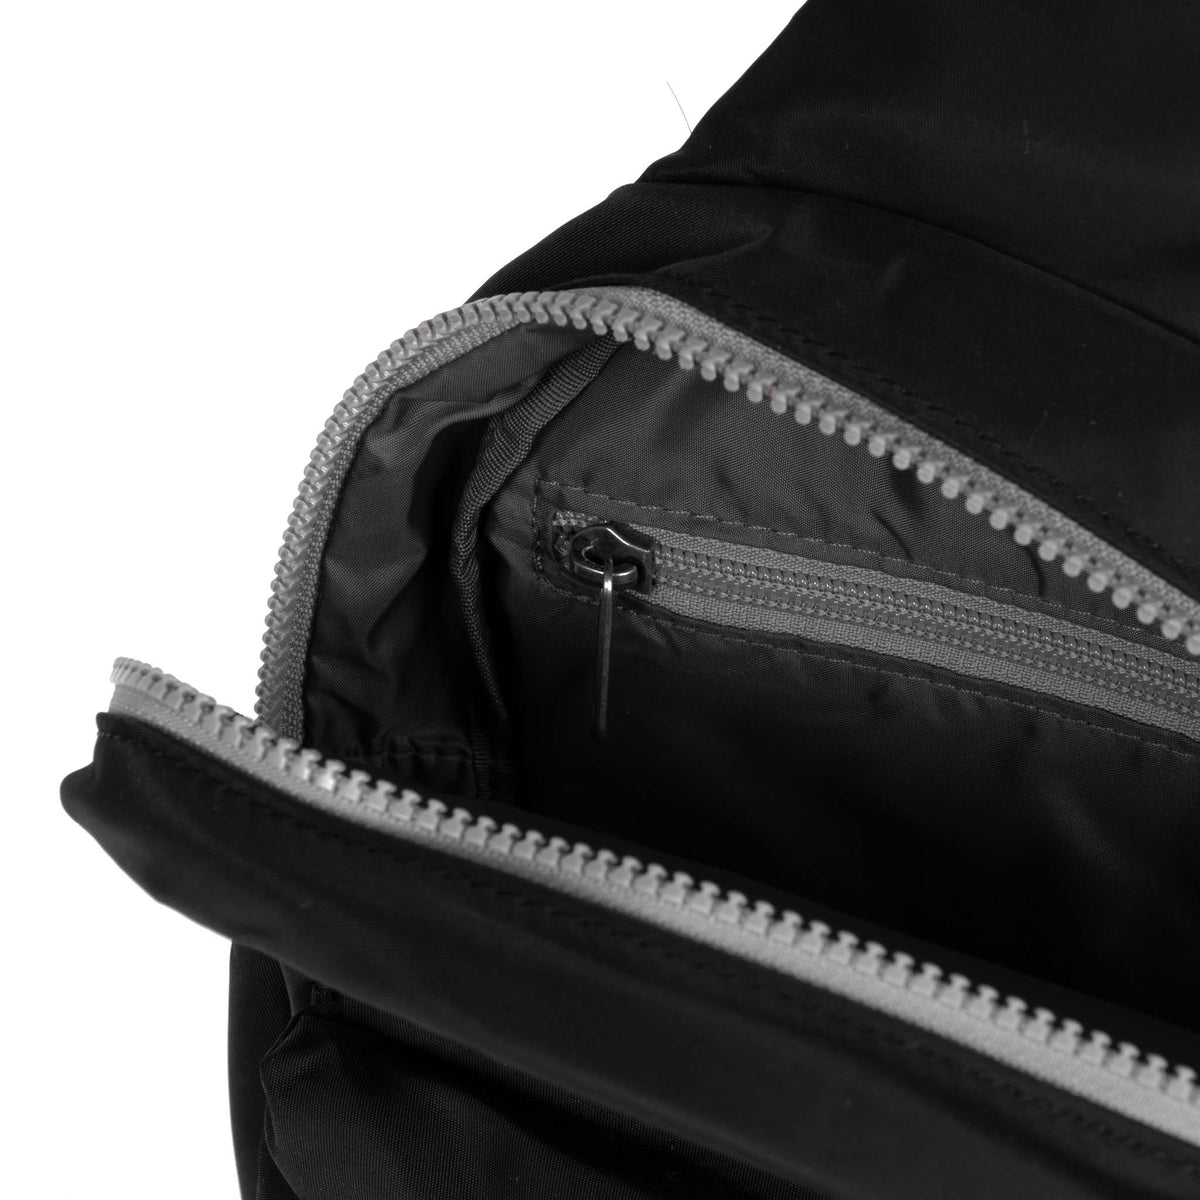 Close-up of a black jacket with an open zipper, showing detailed stitching and the textured fabric of the integrated Ori London Willesden B Large Sling Black made from recycled material.